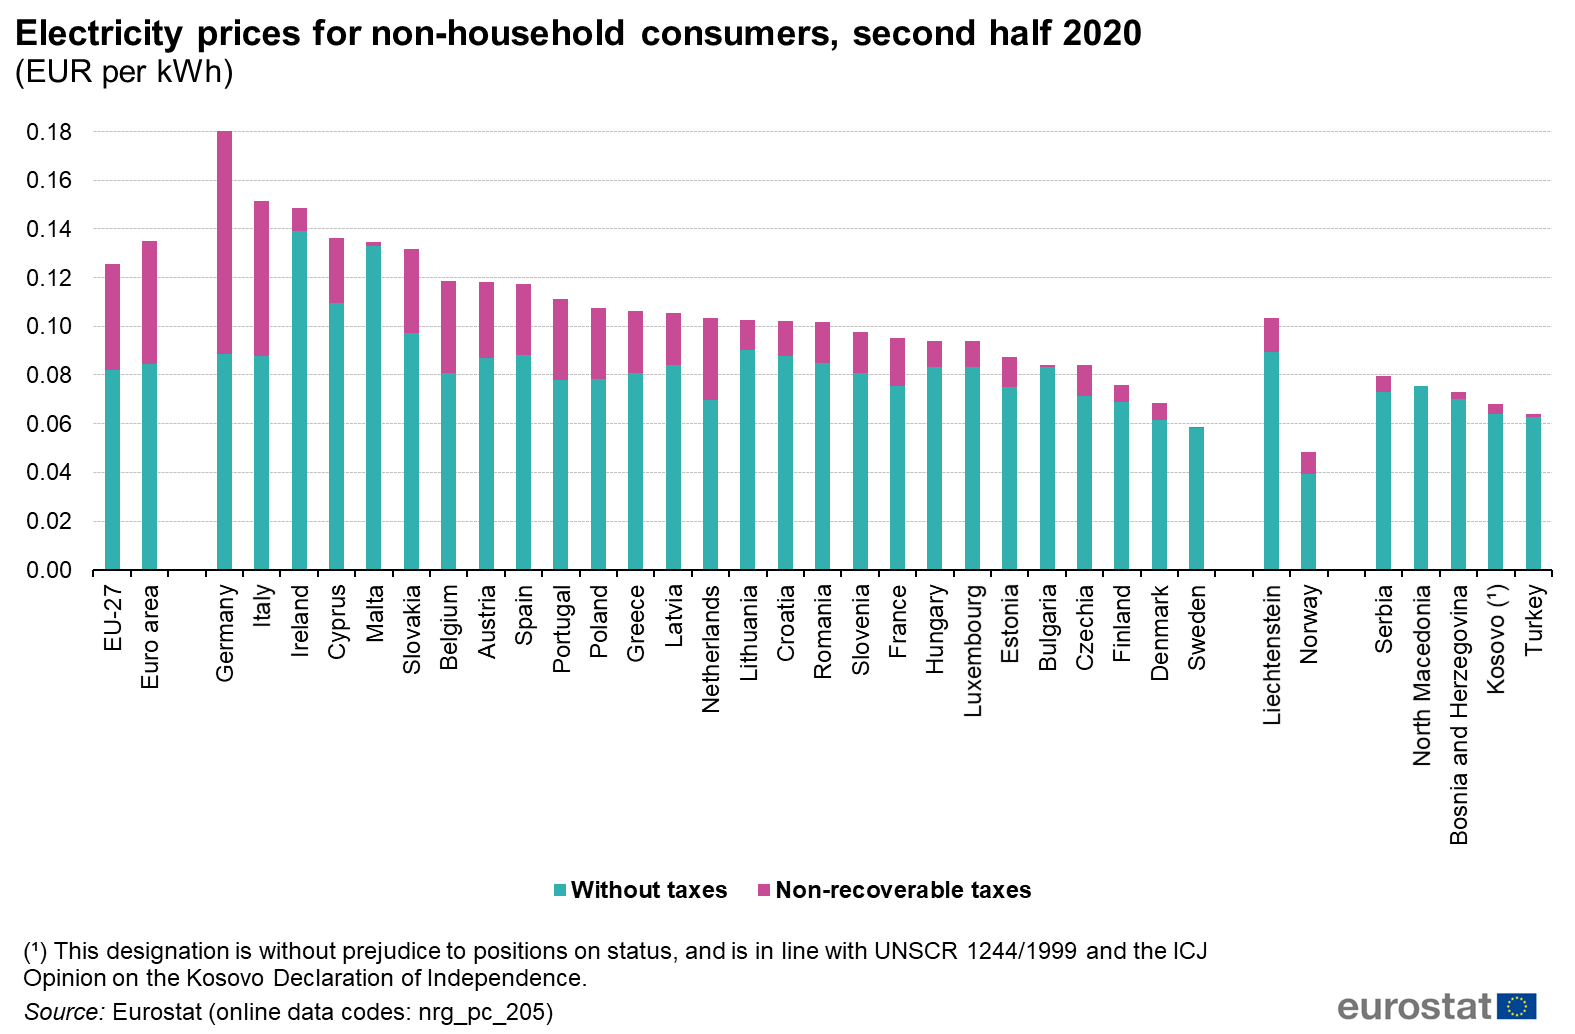 https://ec.europa.eu/eurostat/statistics-explained/images/b/be/Electricity_prices_for_non-household_consumers%2C_second_half_2020_%28EUR_per_kWh%29_v1.png